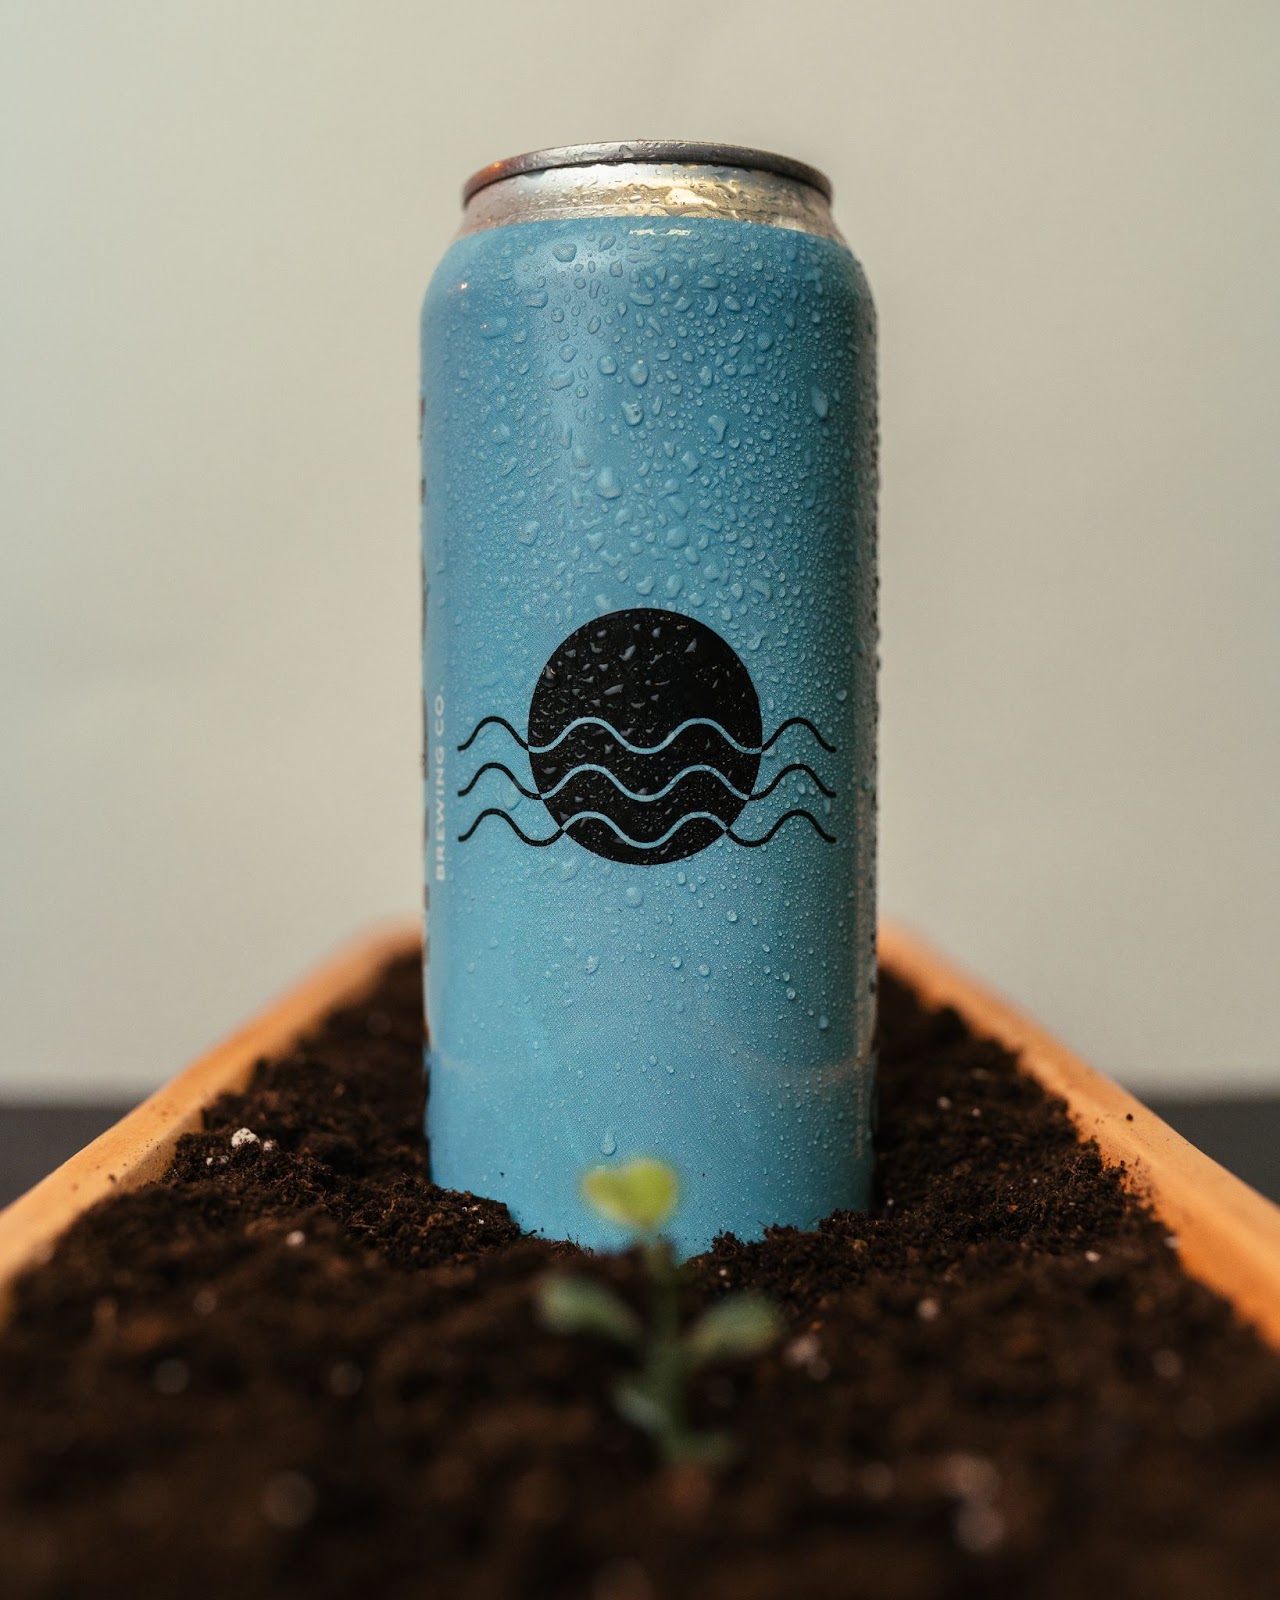 A can of Karbon beer sitting in a planter.  The can is turquoise and has Karbon's logo on the front.